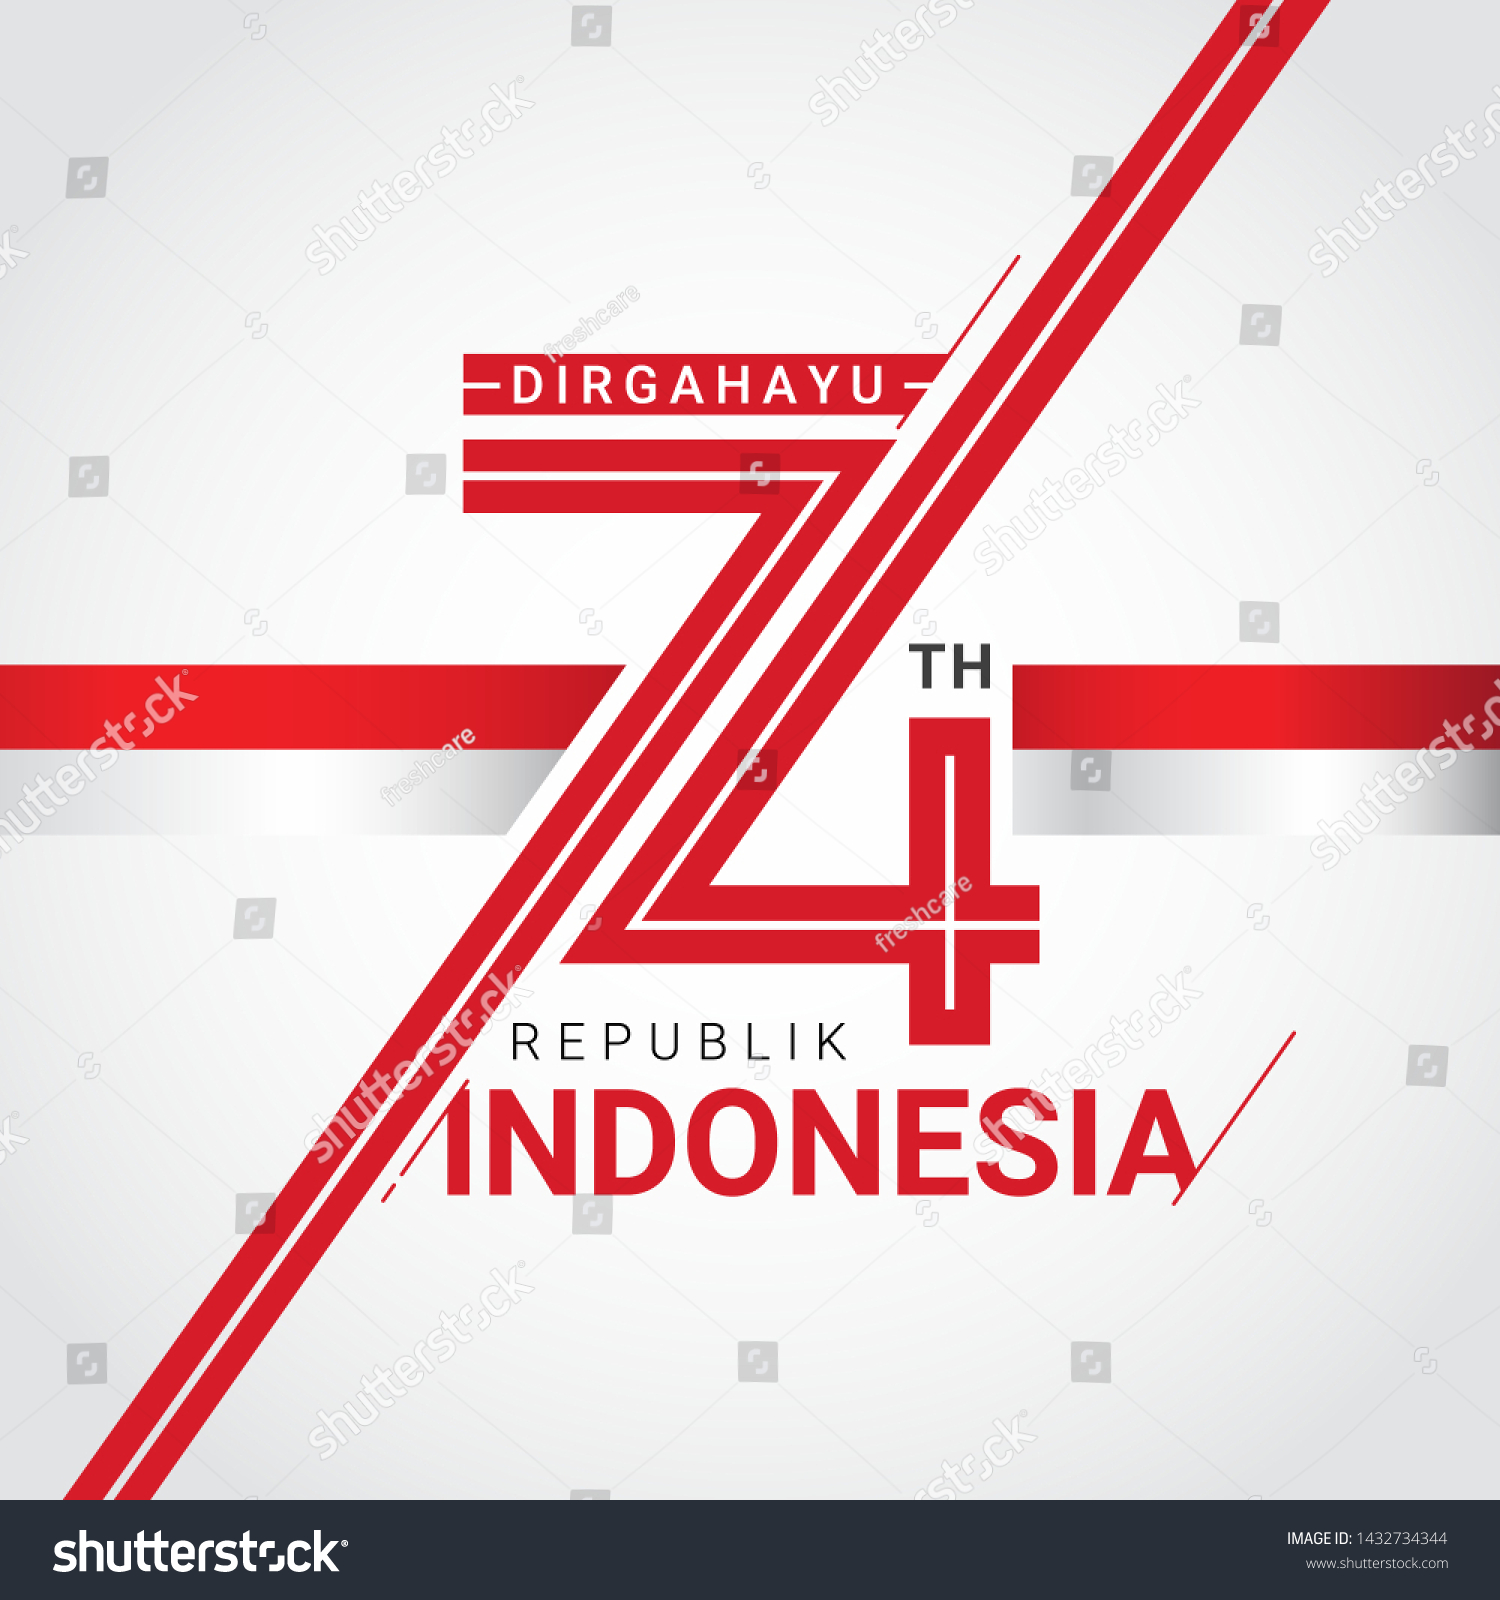 17 August Happy Indonesia Independence Day Stock Vector Royalty Free 1432734344 Shutterstock 6798